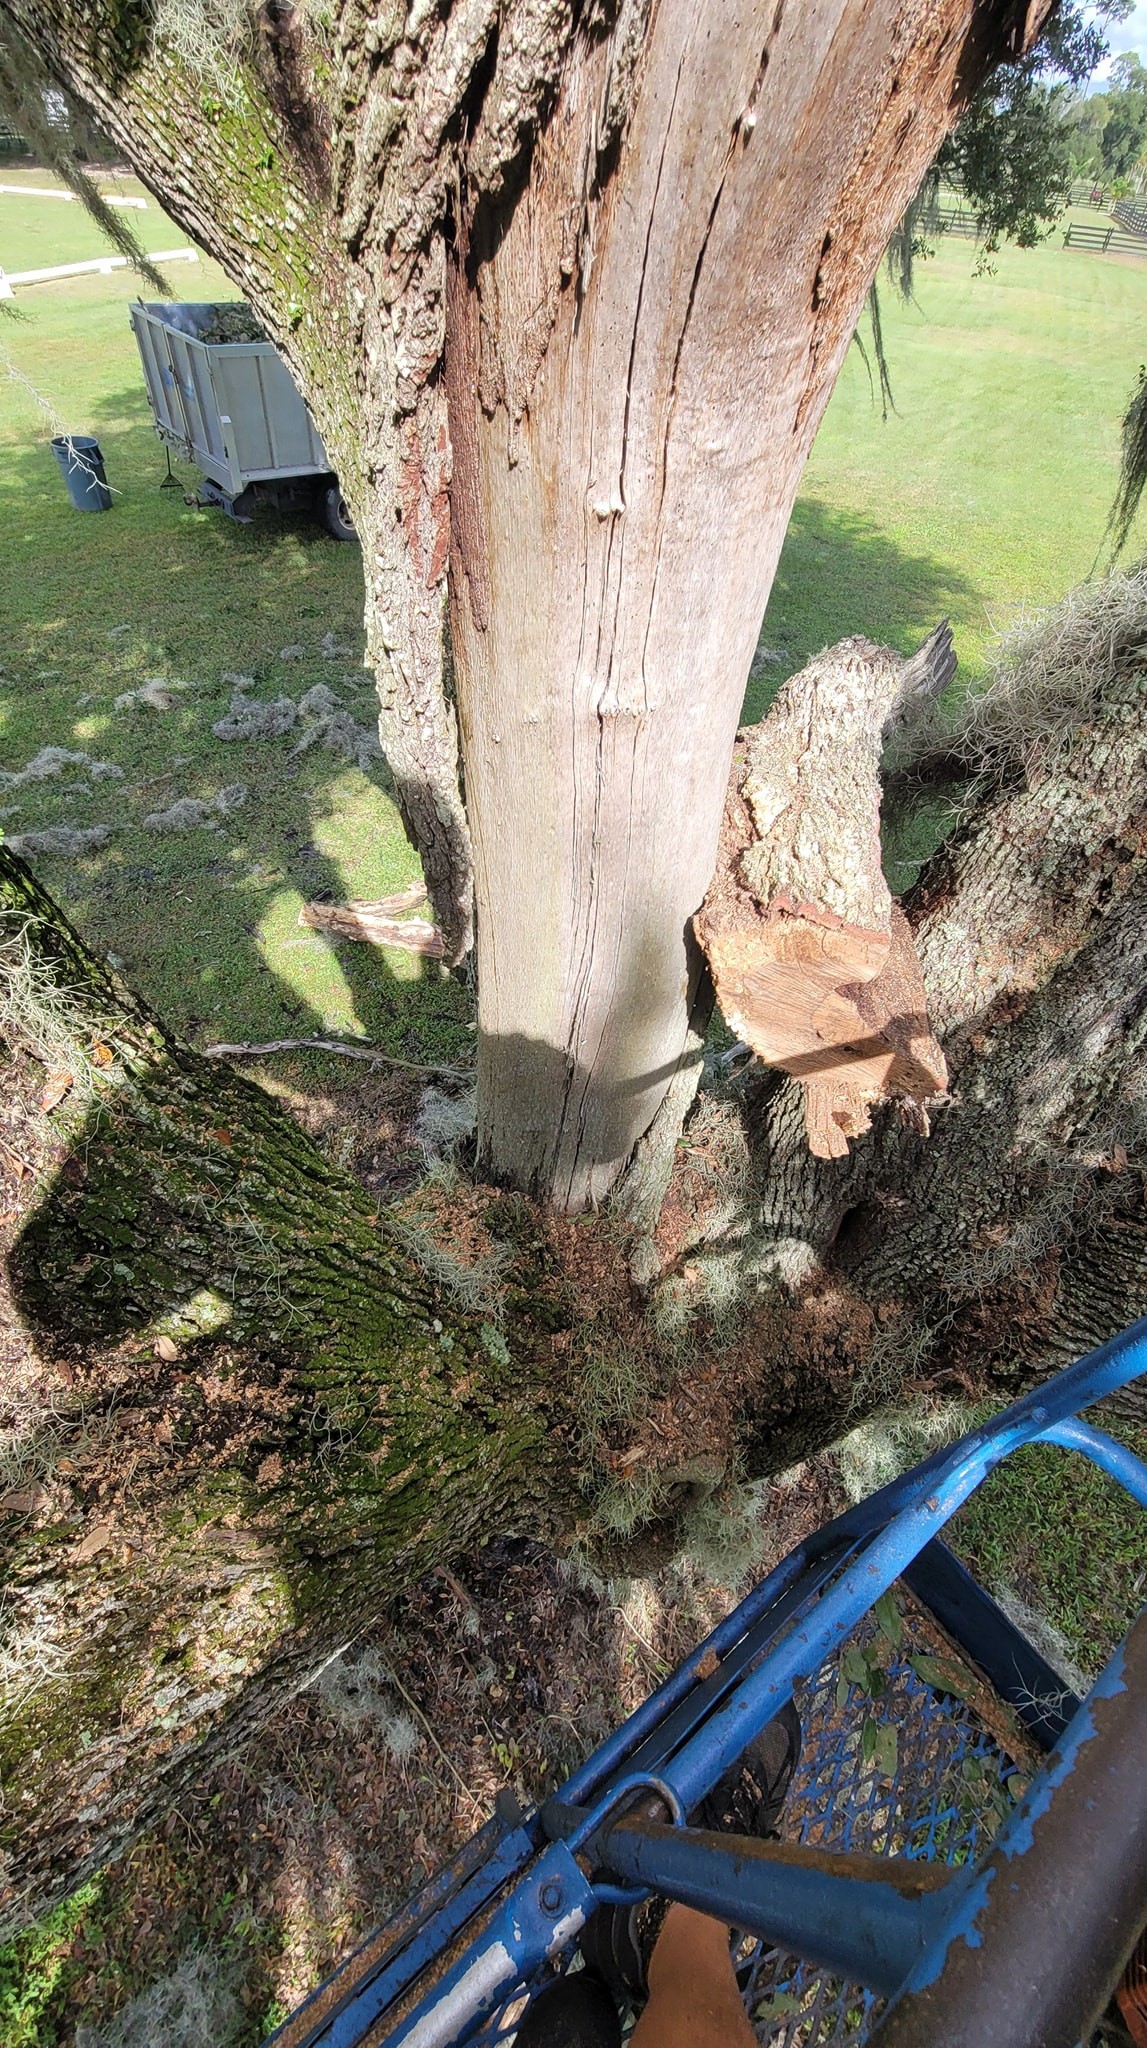 A downward facing view of a tree